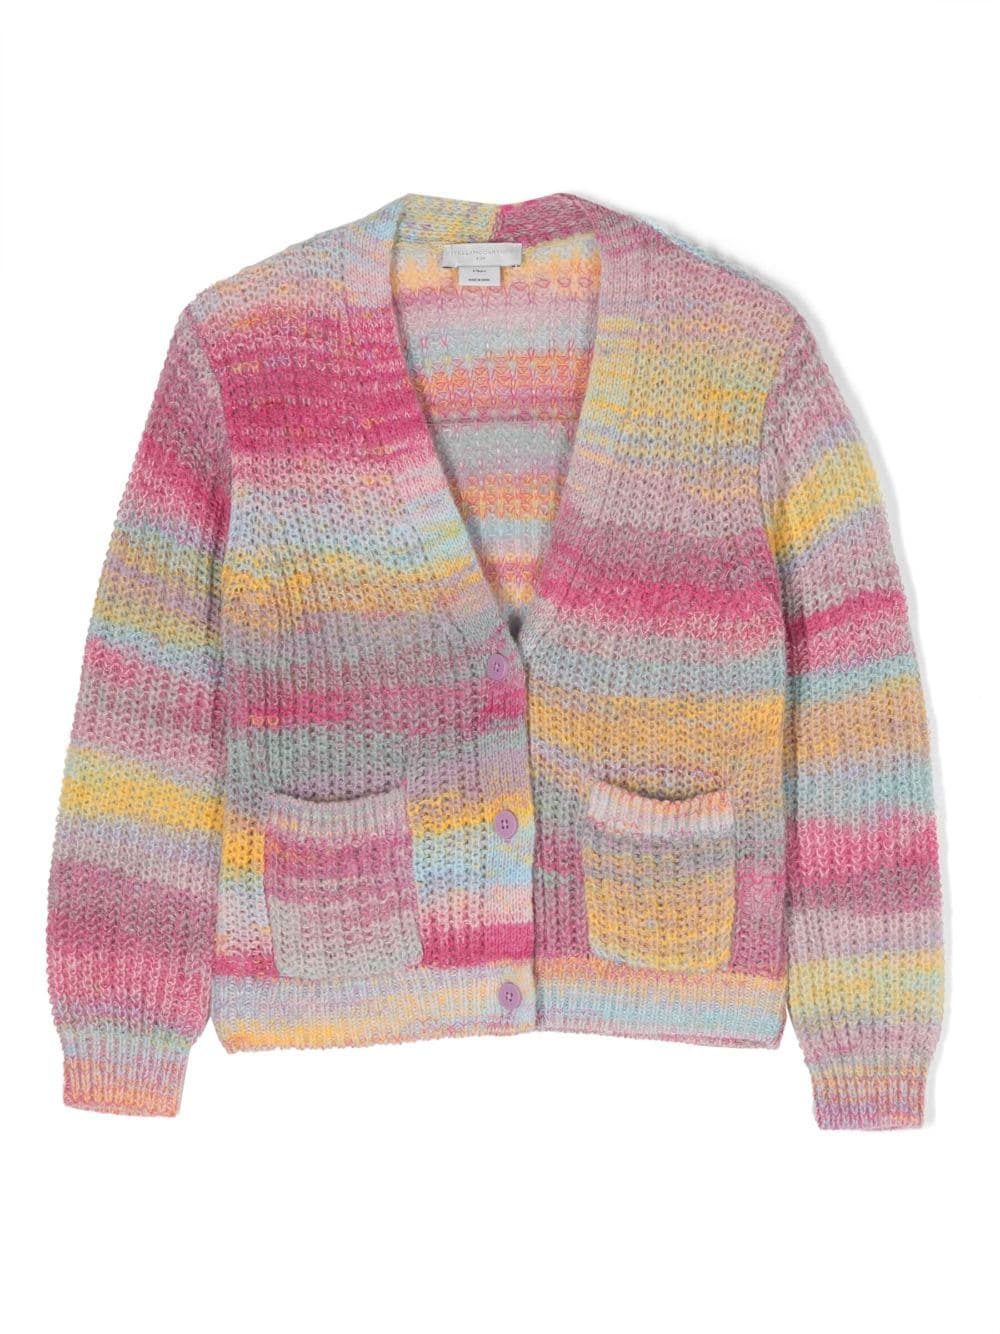 Multicolored cardigan for girls